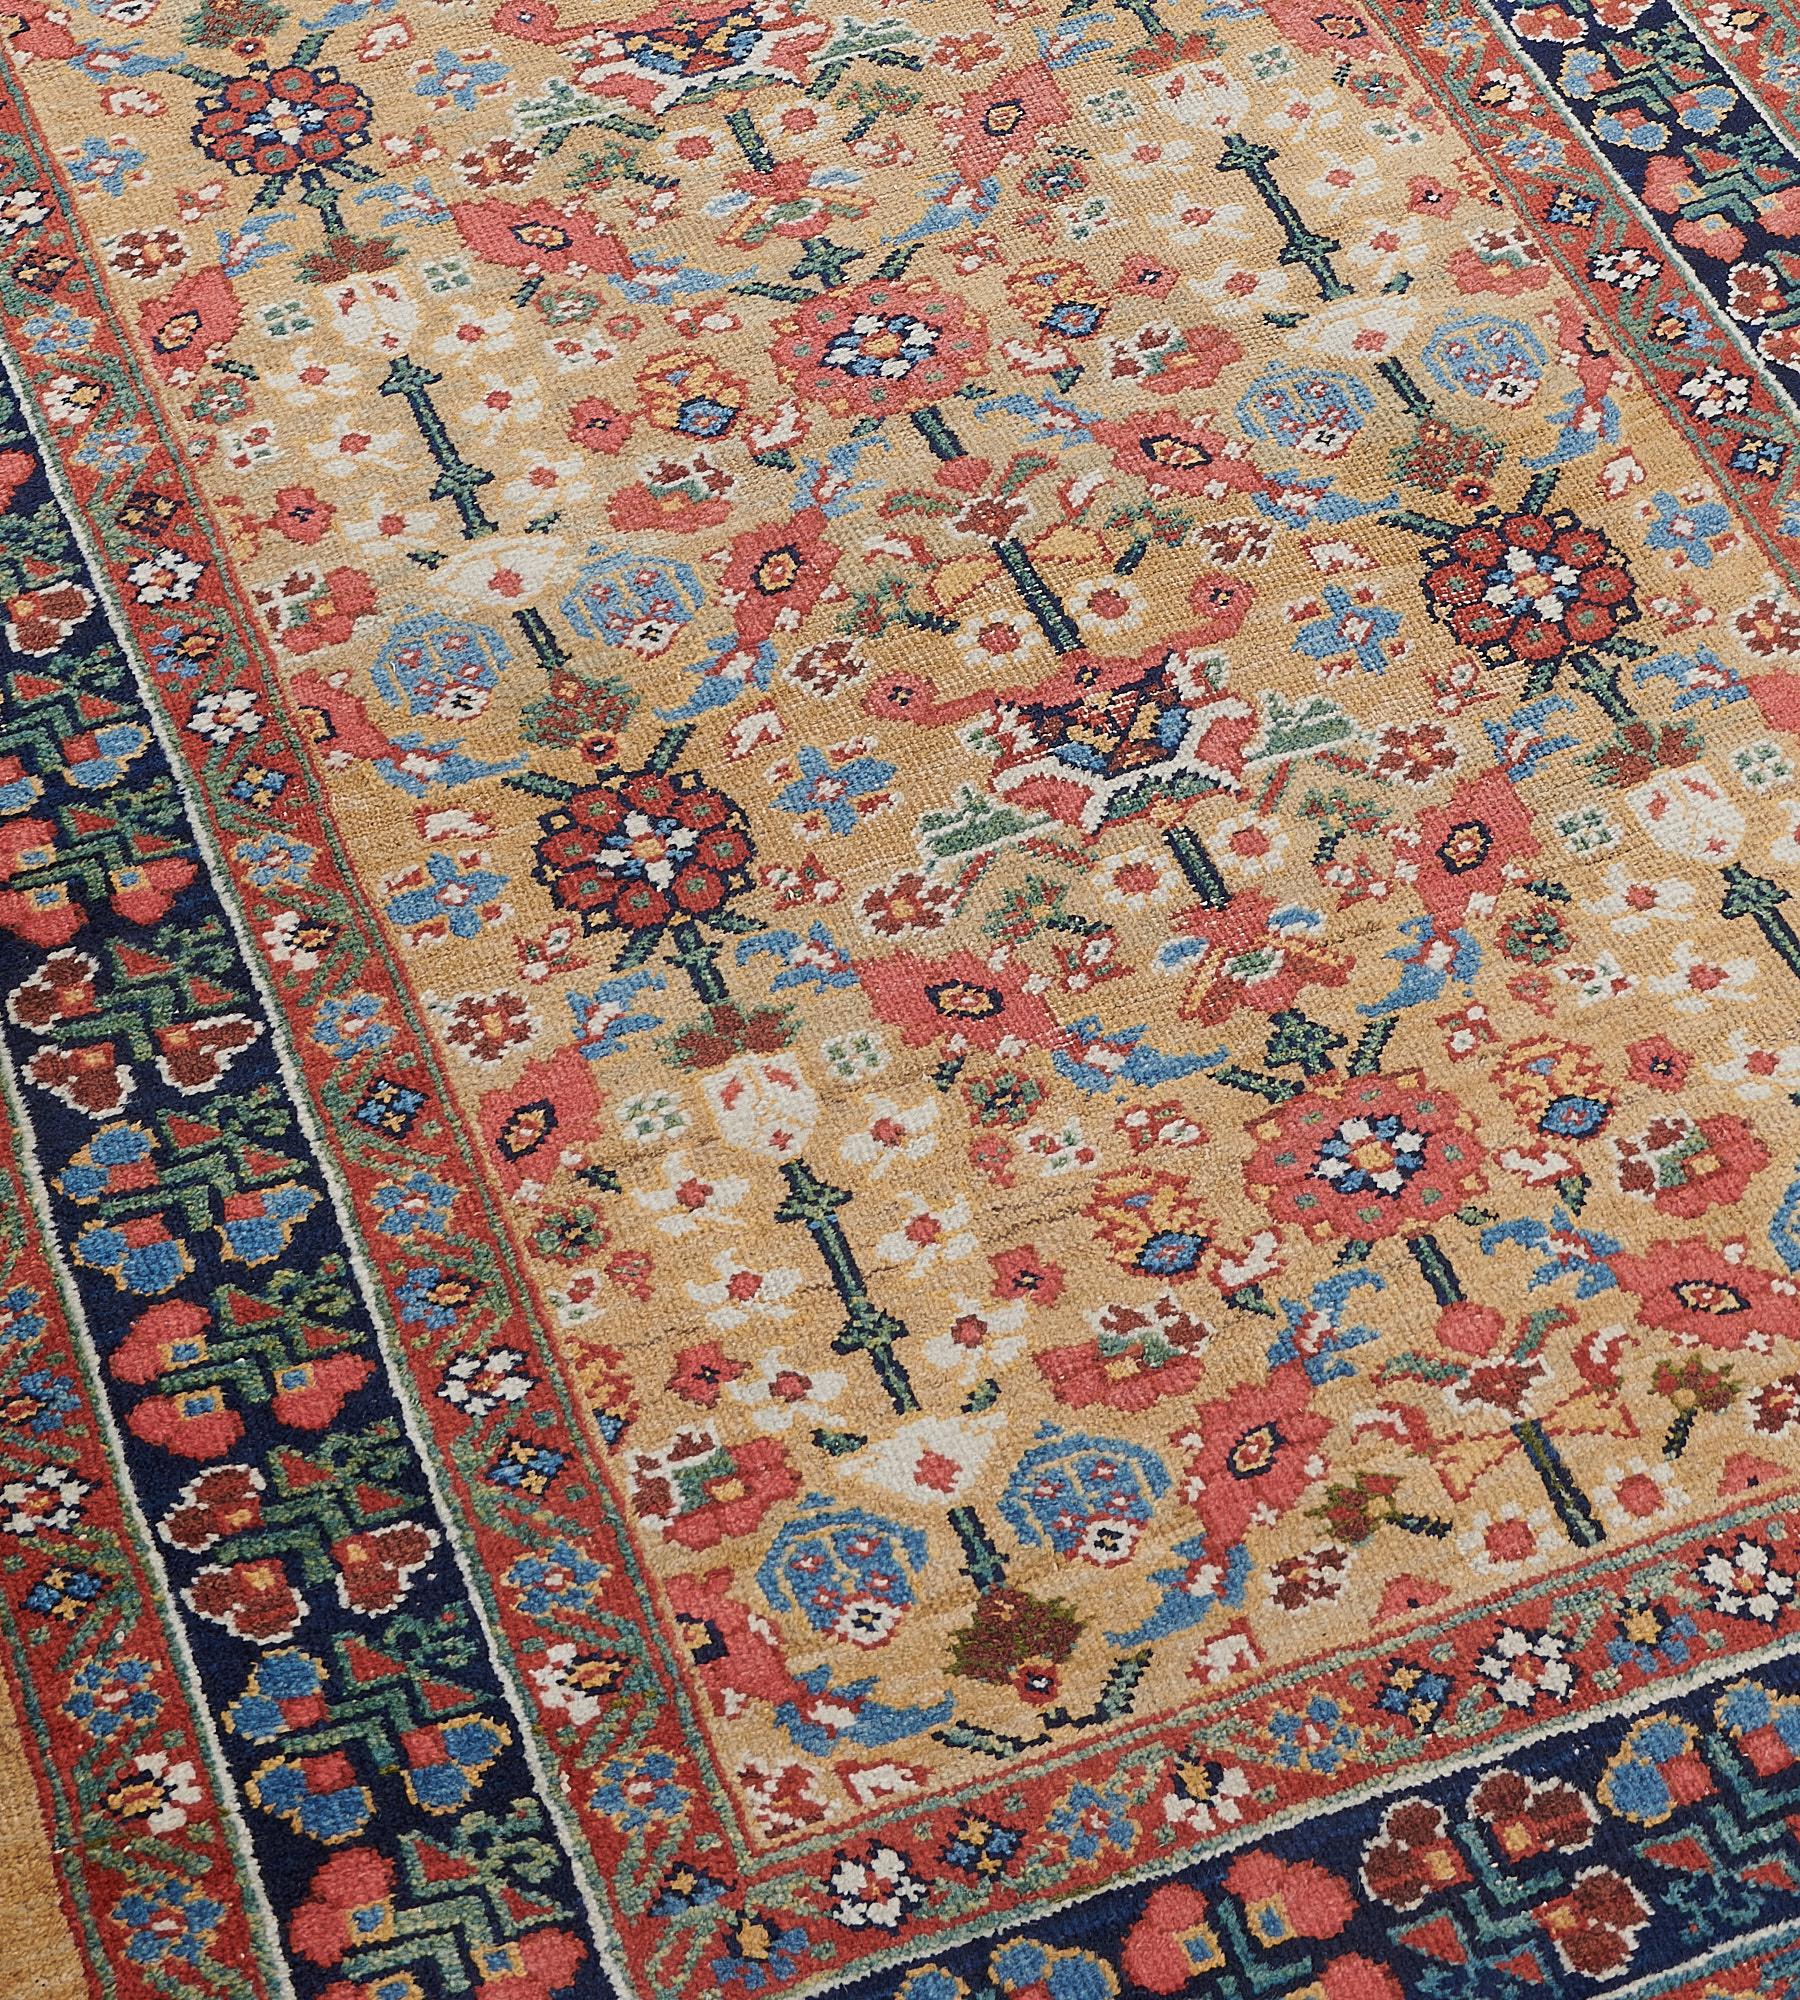 This antique Sultanabad Runner has a camel field with an overall design of terracotta-red, light blue, ivory and green palmette and floral vines scattered with further floral motifs, in a shaded indigo-blue border of light blue, terracotta-red,